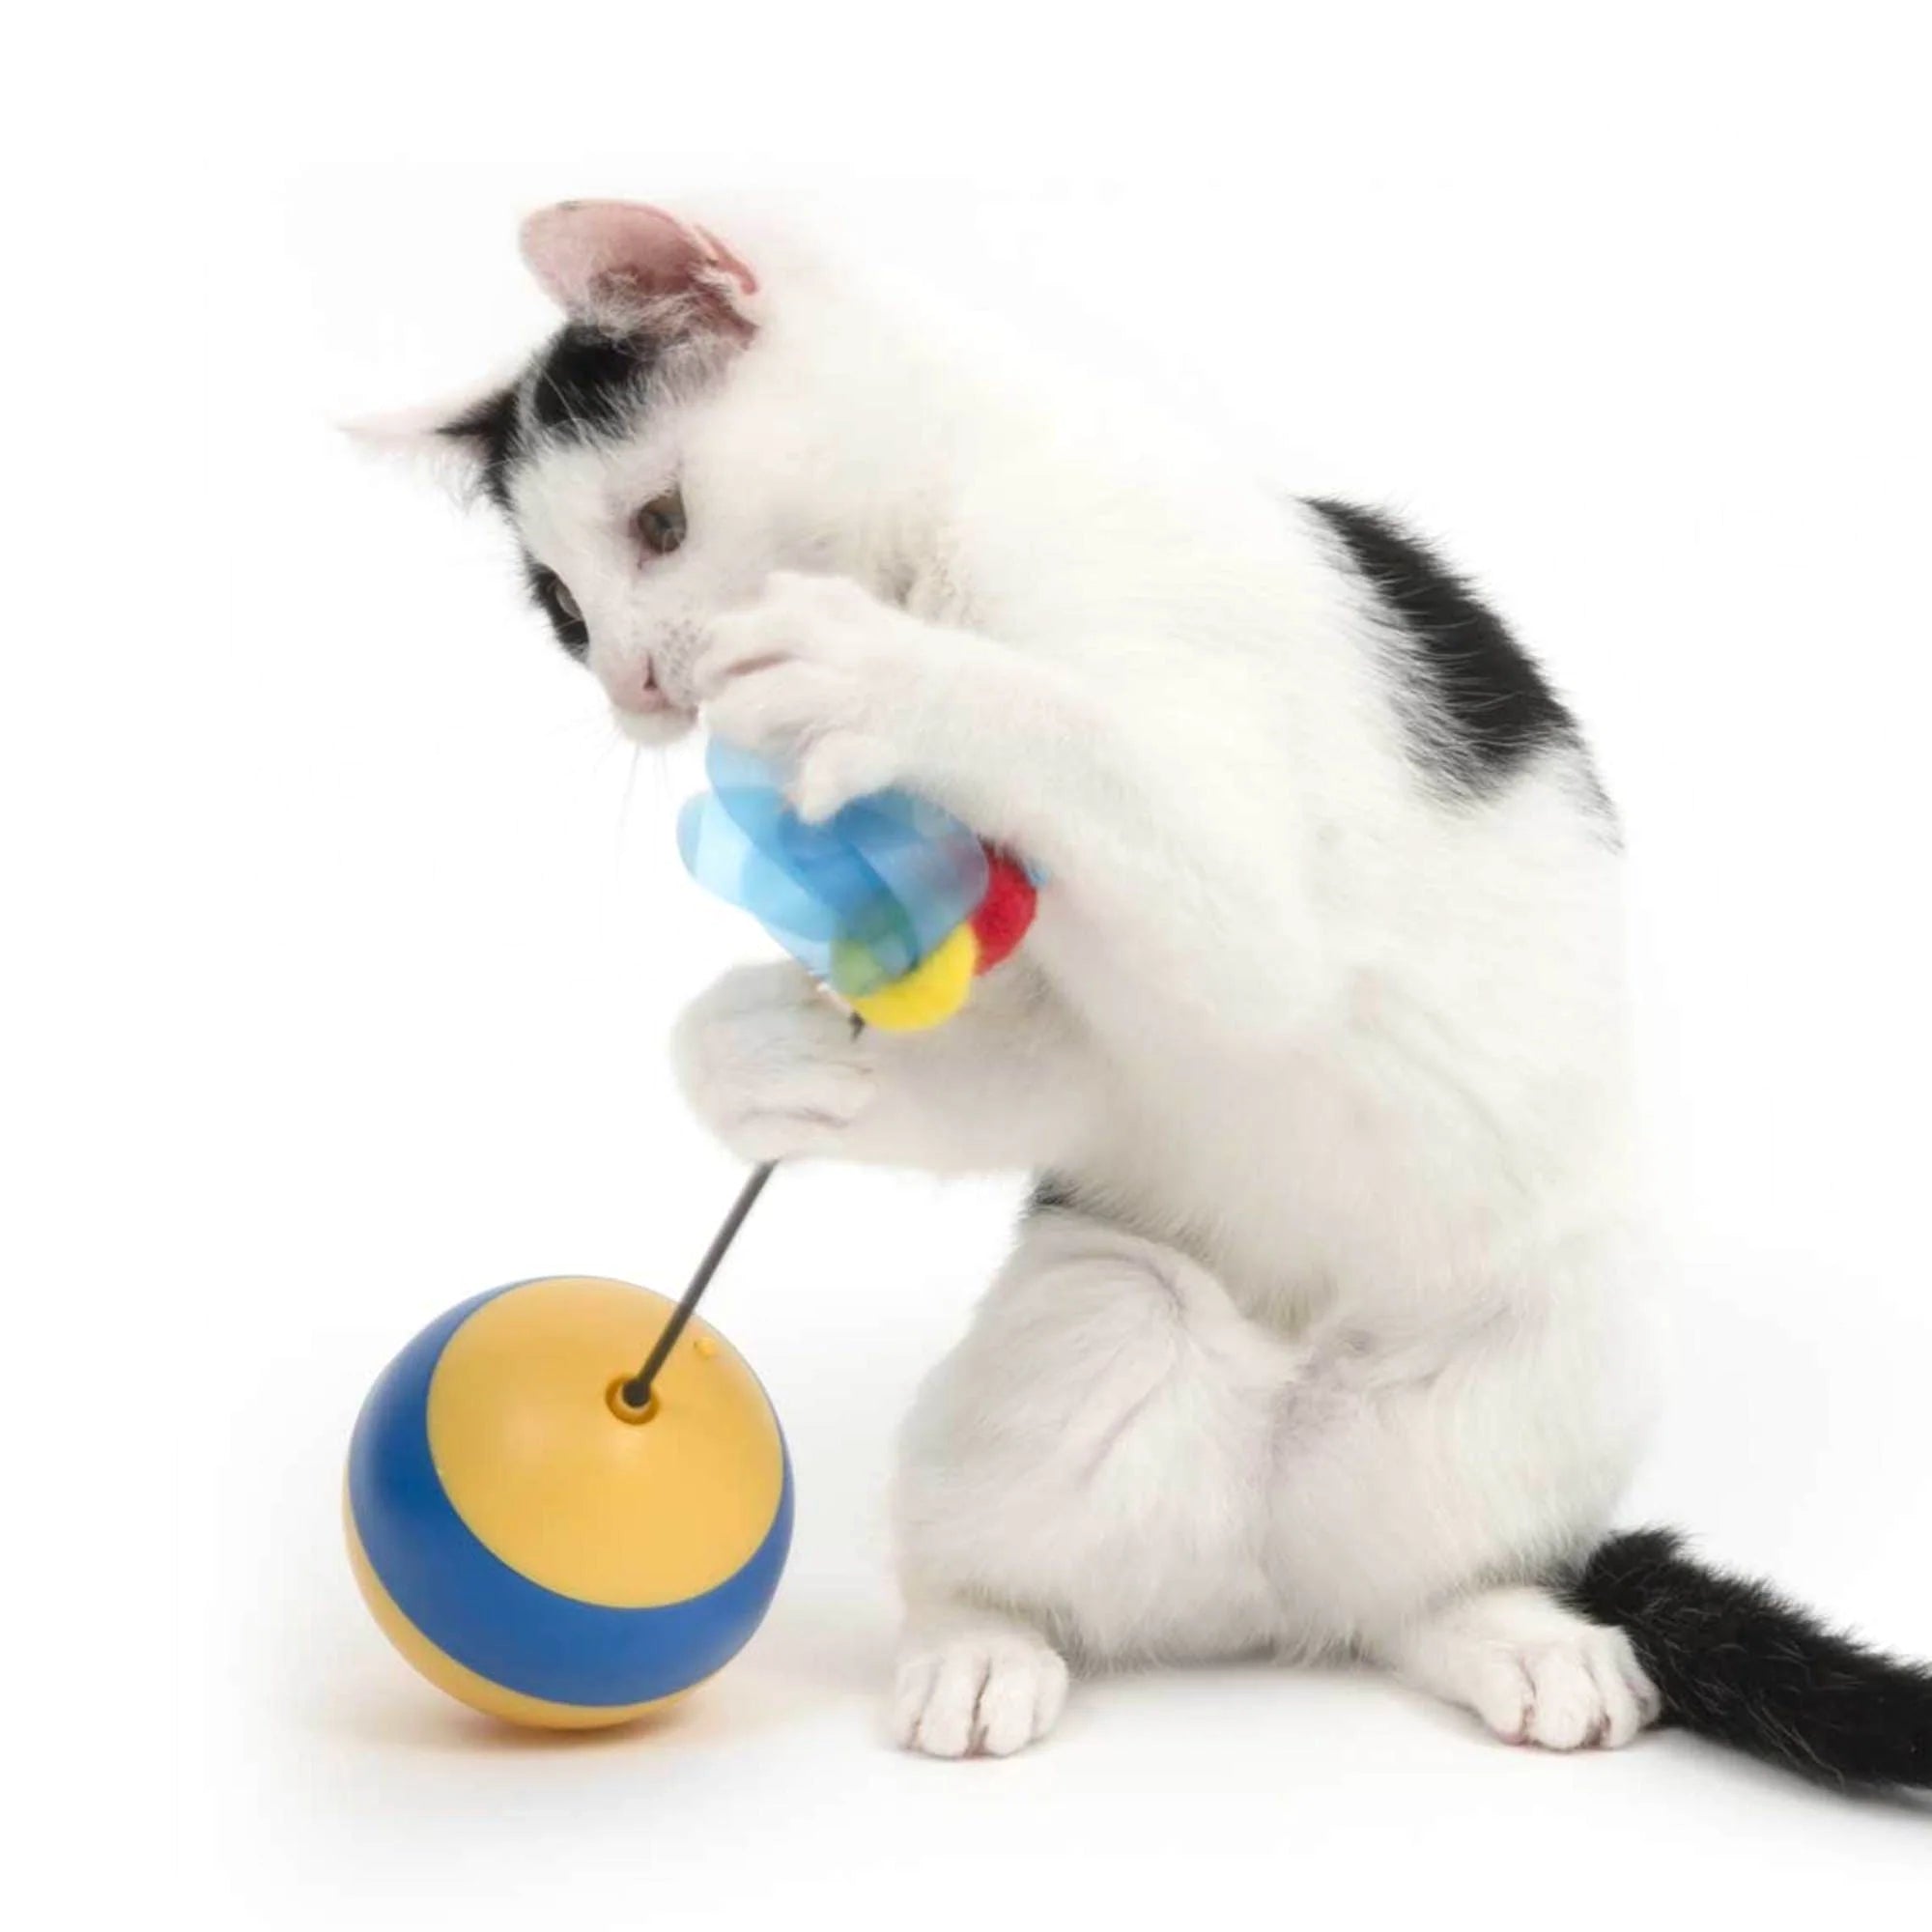 Catit Play Spinning Bee Cat Toy